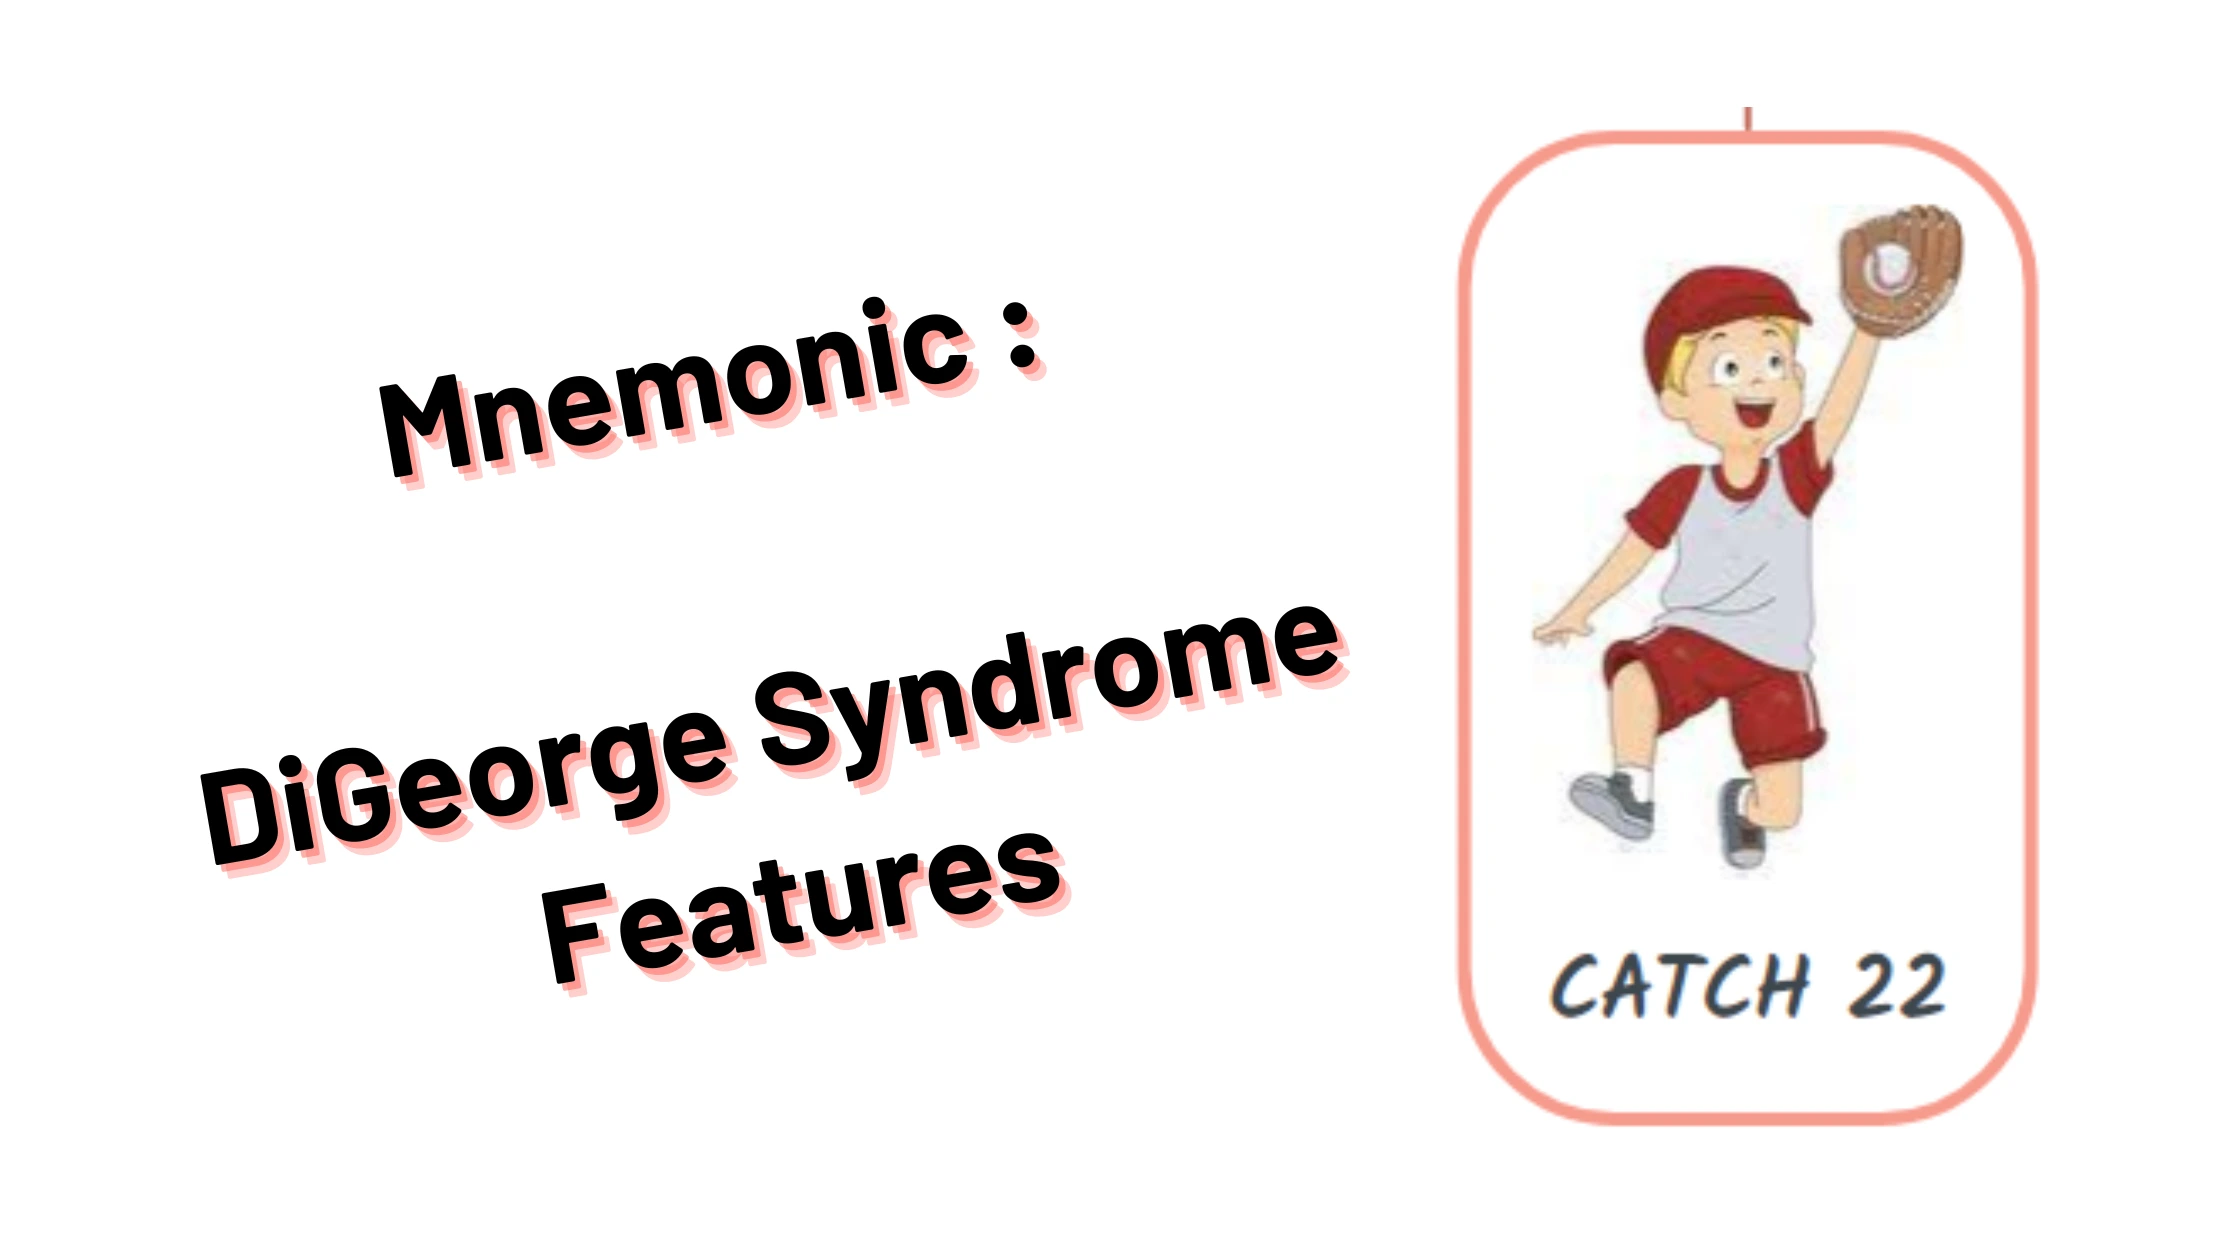 You are currently viewing [Very Cool] Mnemonic : DiGeorge Syndrome Features